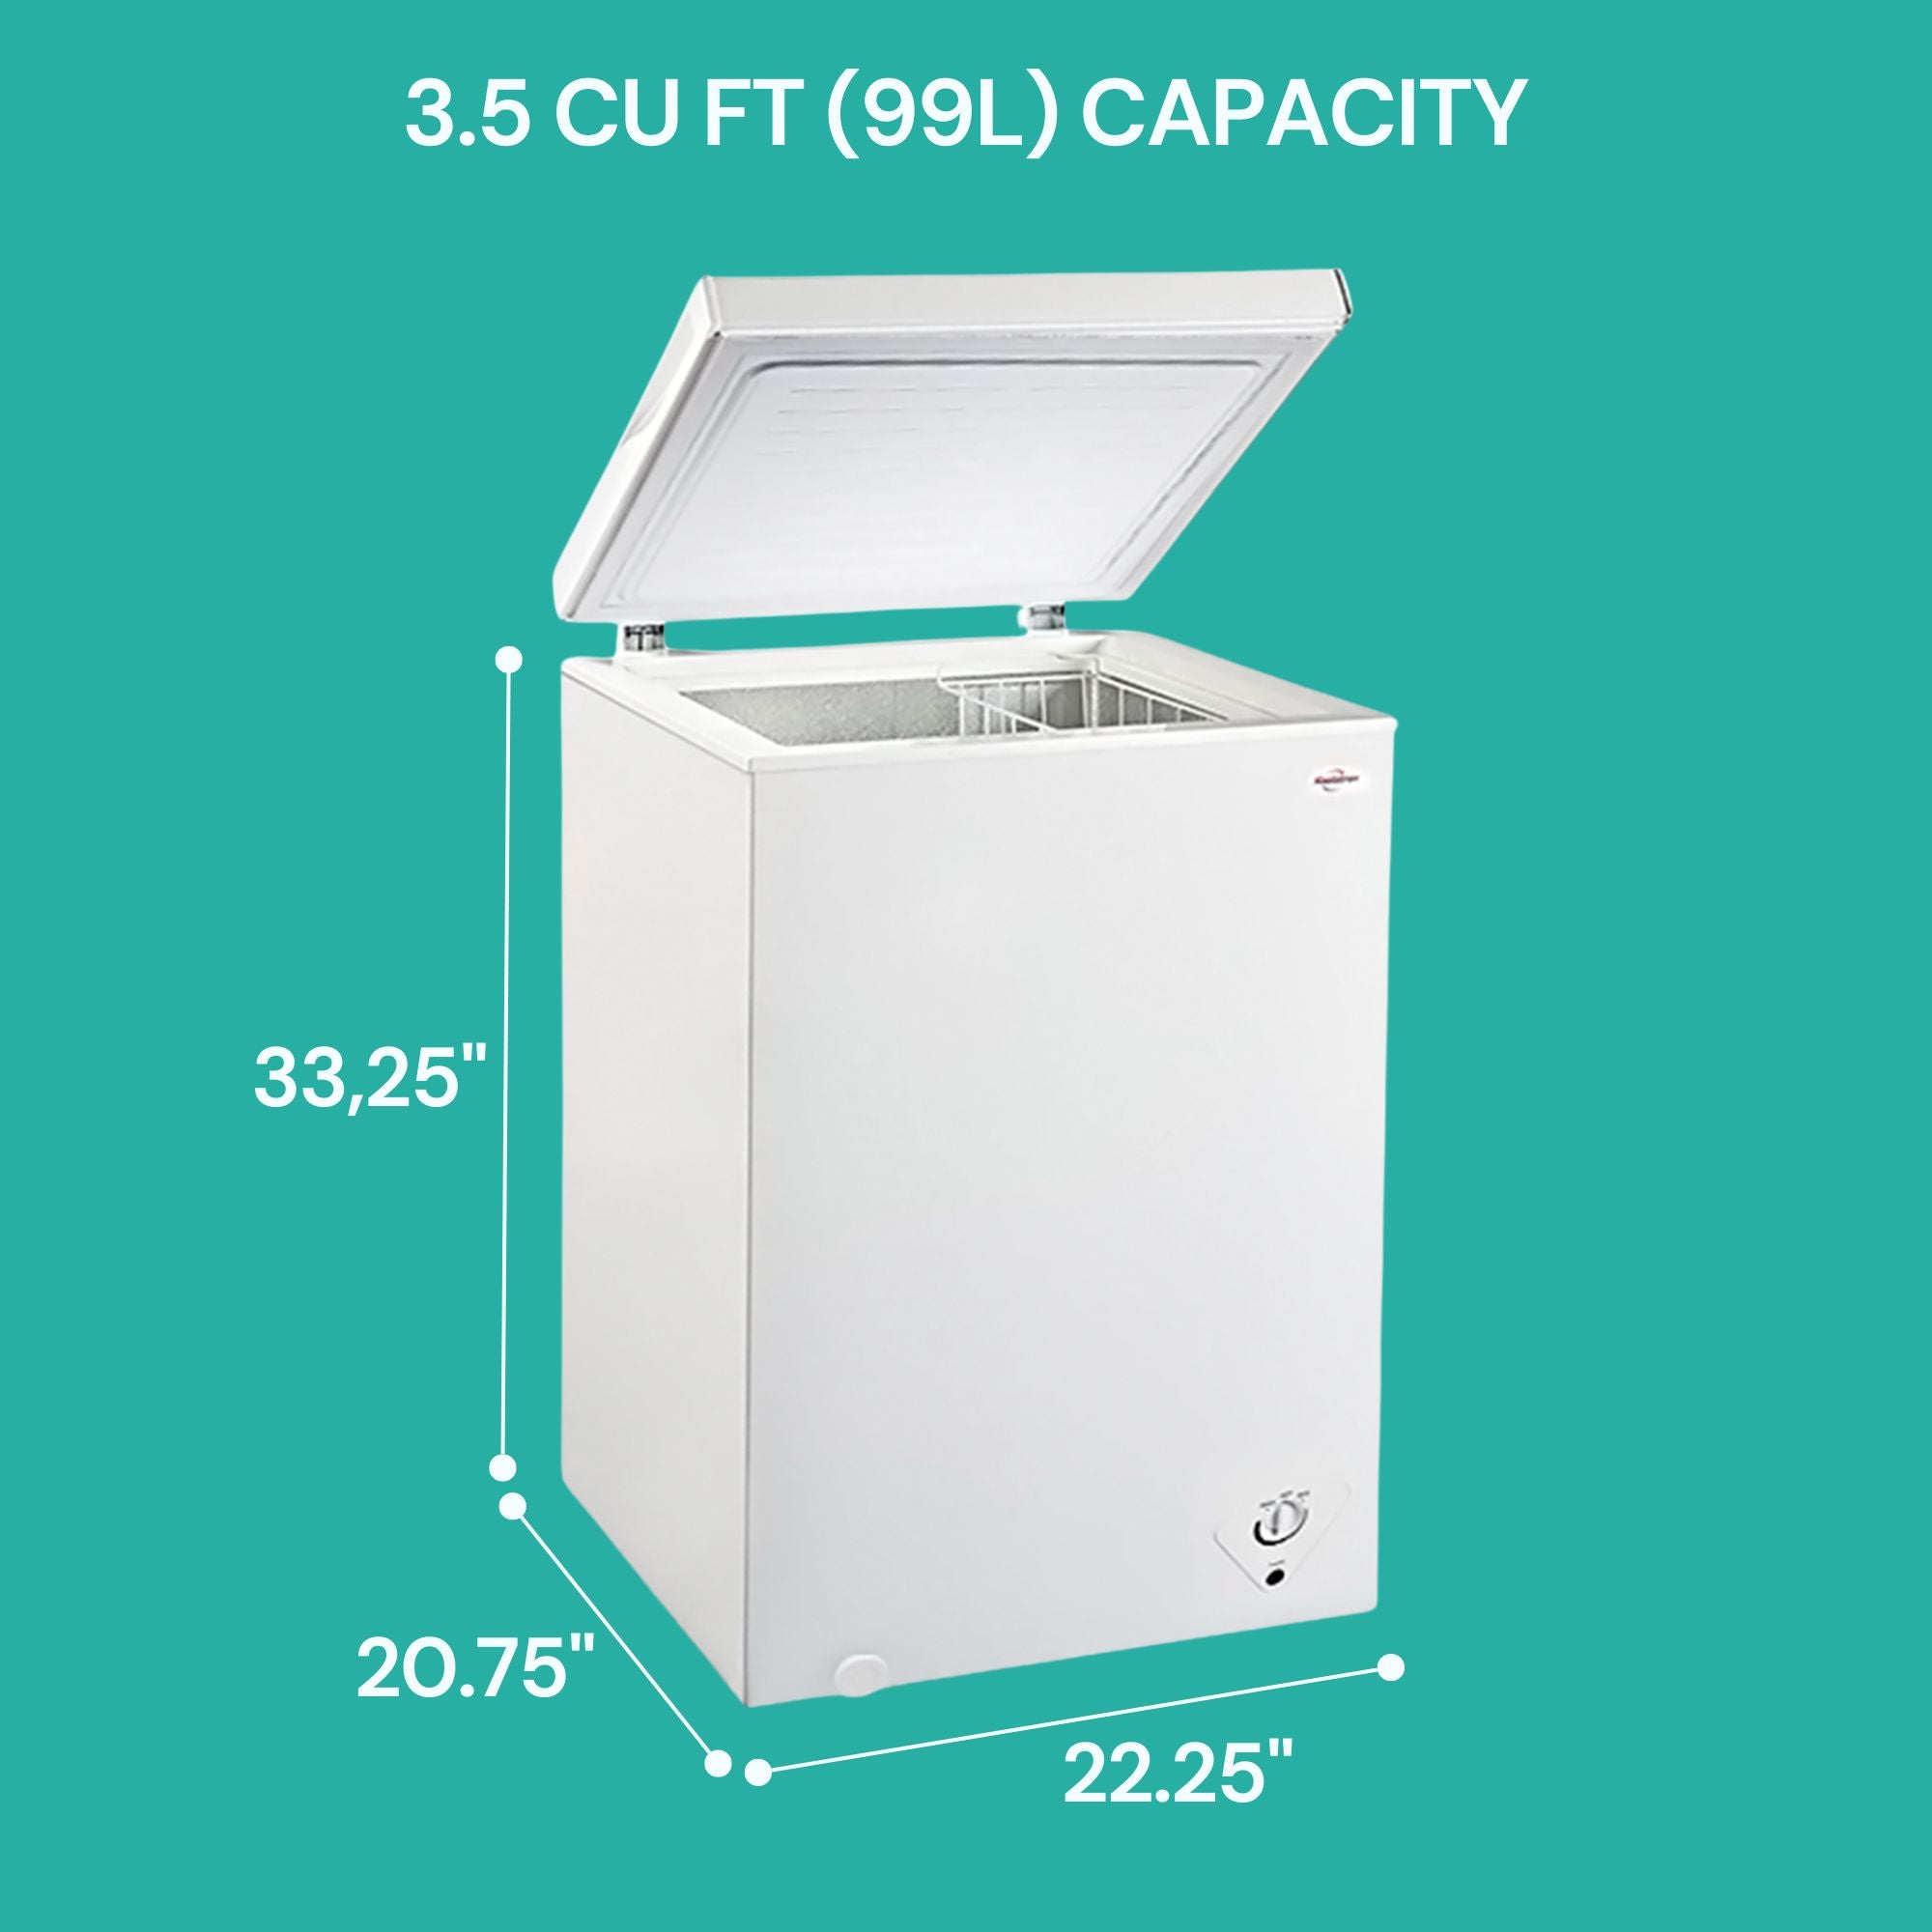 Koolatron white chest freezer with dimensions and capacity labeled